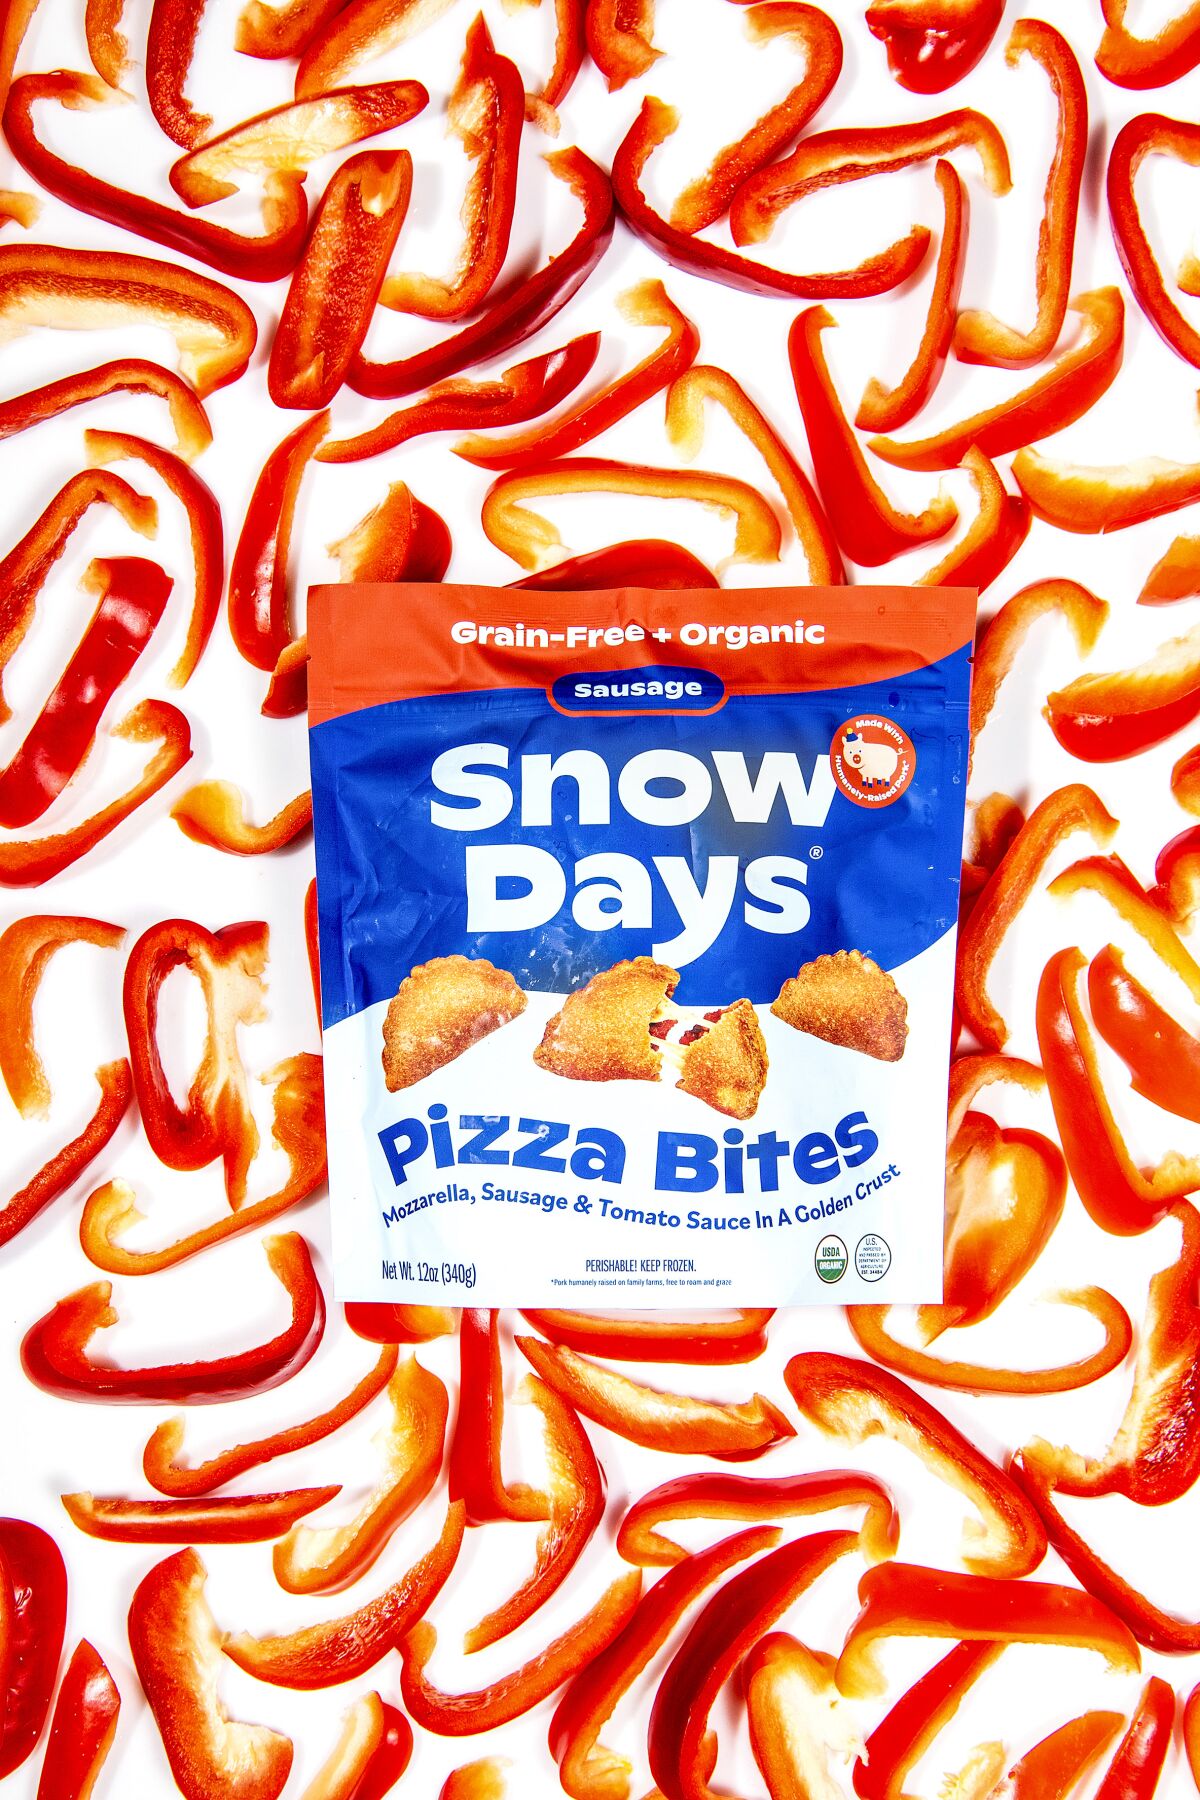 A package of Snow Days Pizza Bites on a background of red bell pepper slices.